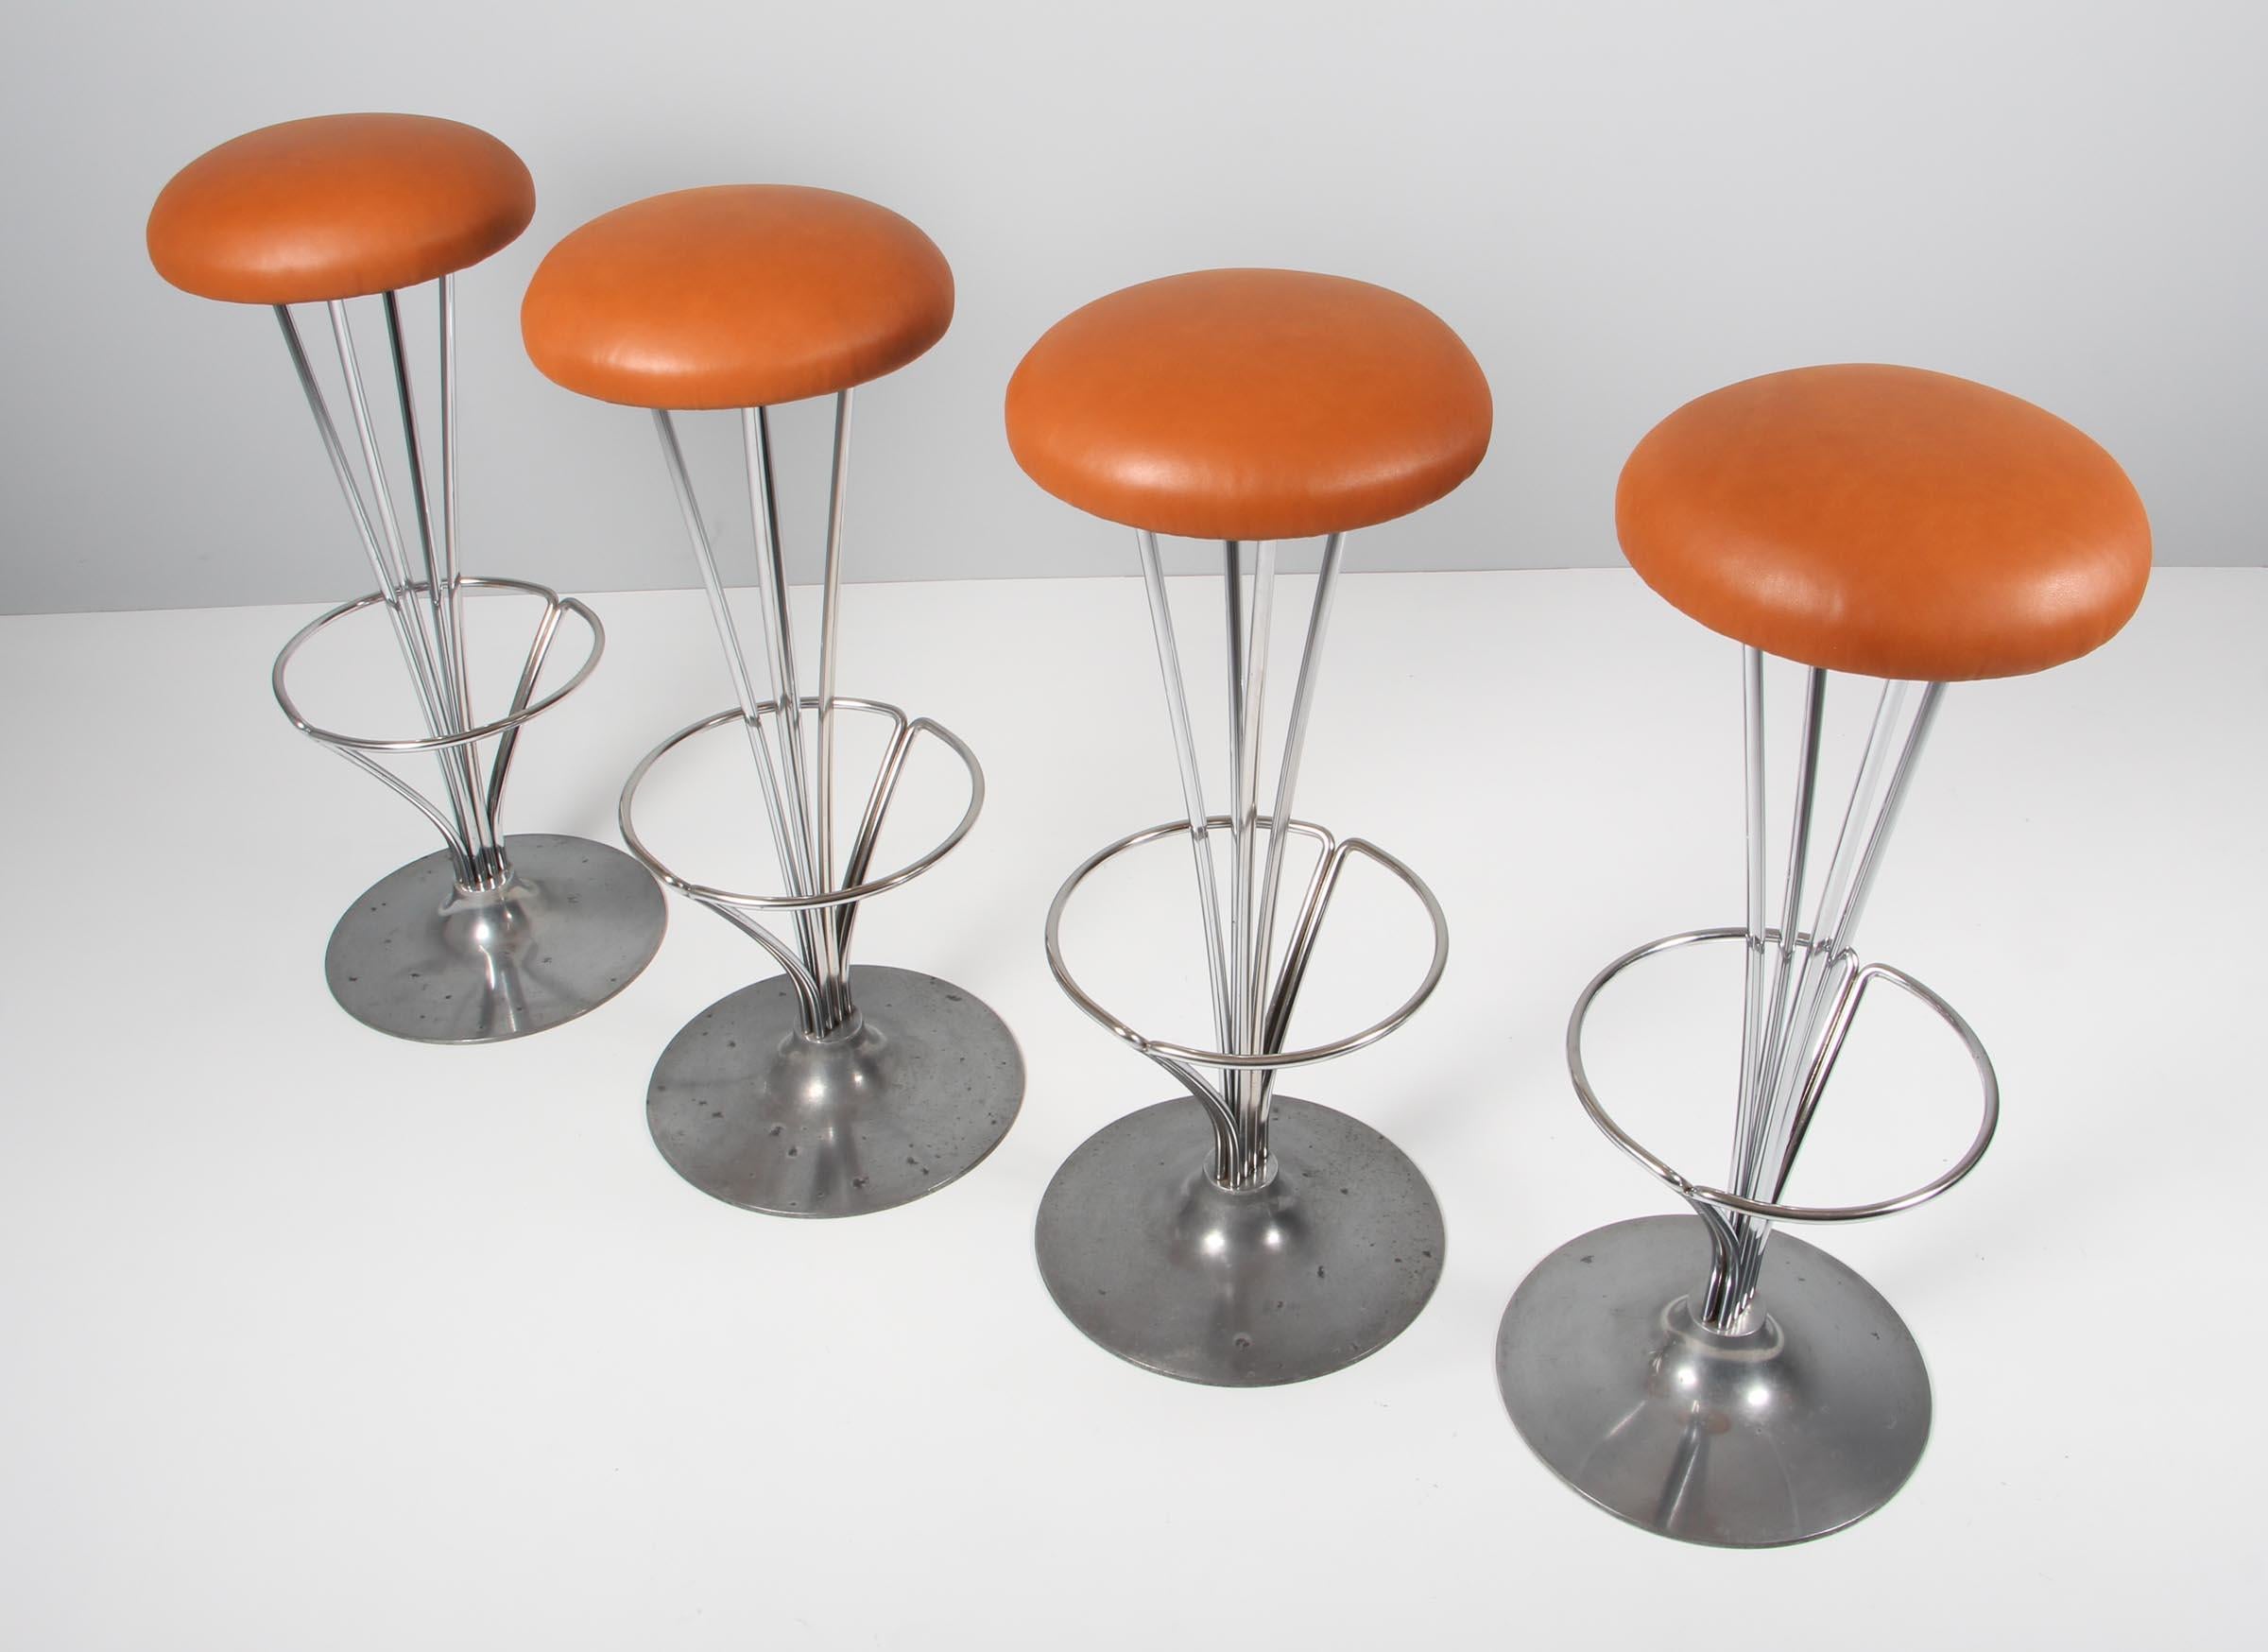 Piet Hein bar stools new upholstered with tan aniline leather.

Piet Hein base

Made by Fritz Hansen.